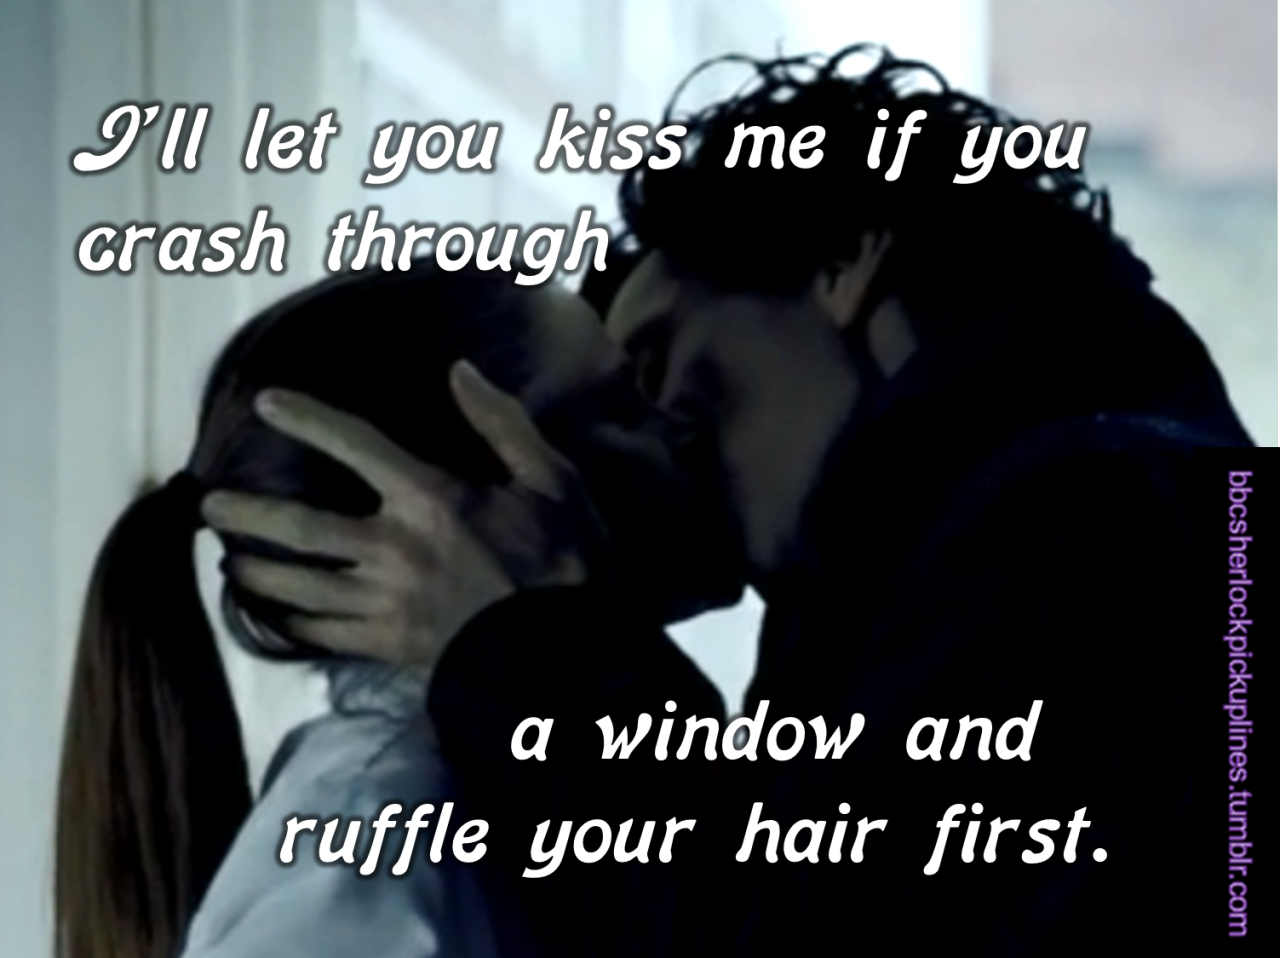 &ldquo;I&rsquo;ll let you kiss me if you crash through a window and ruffle